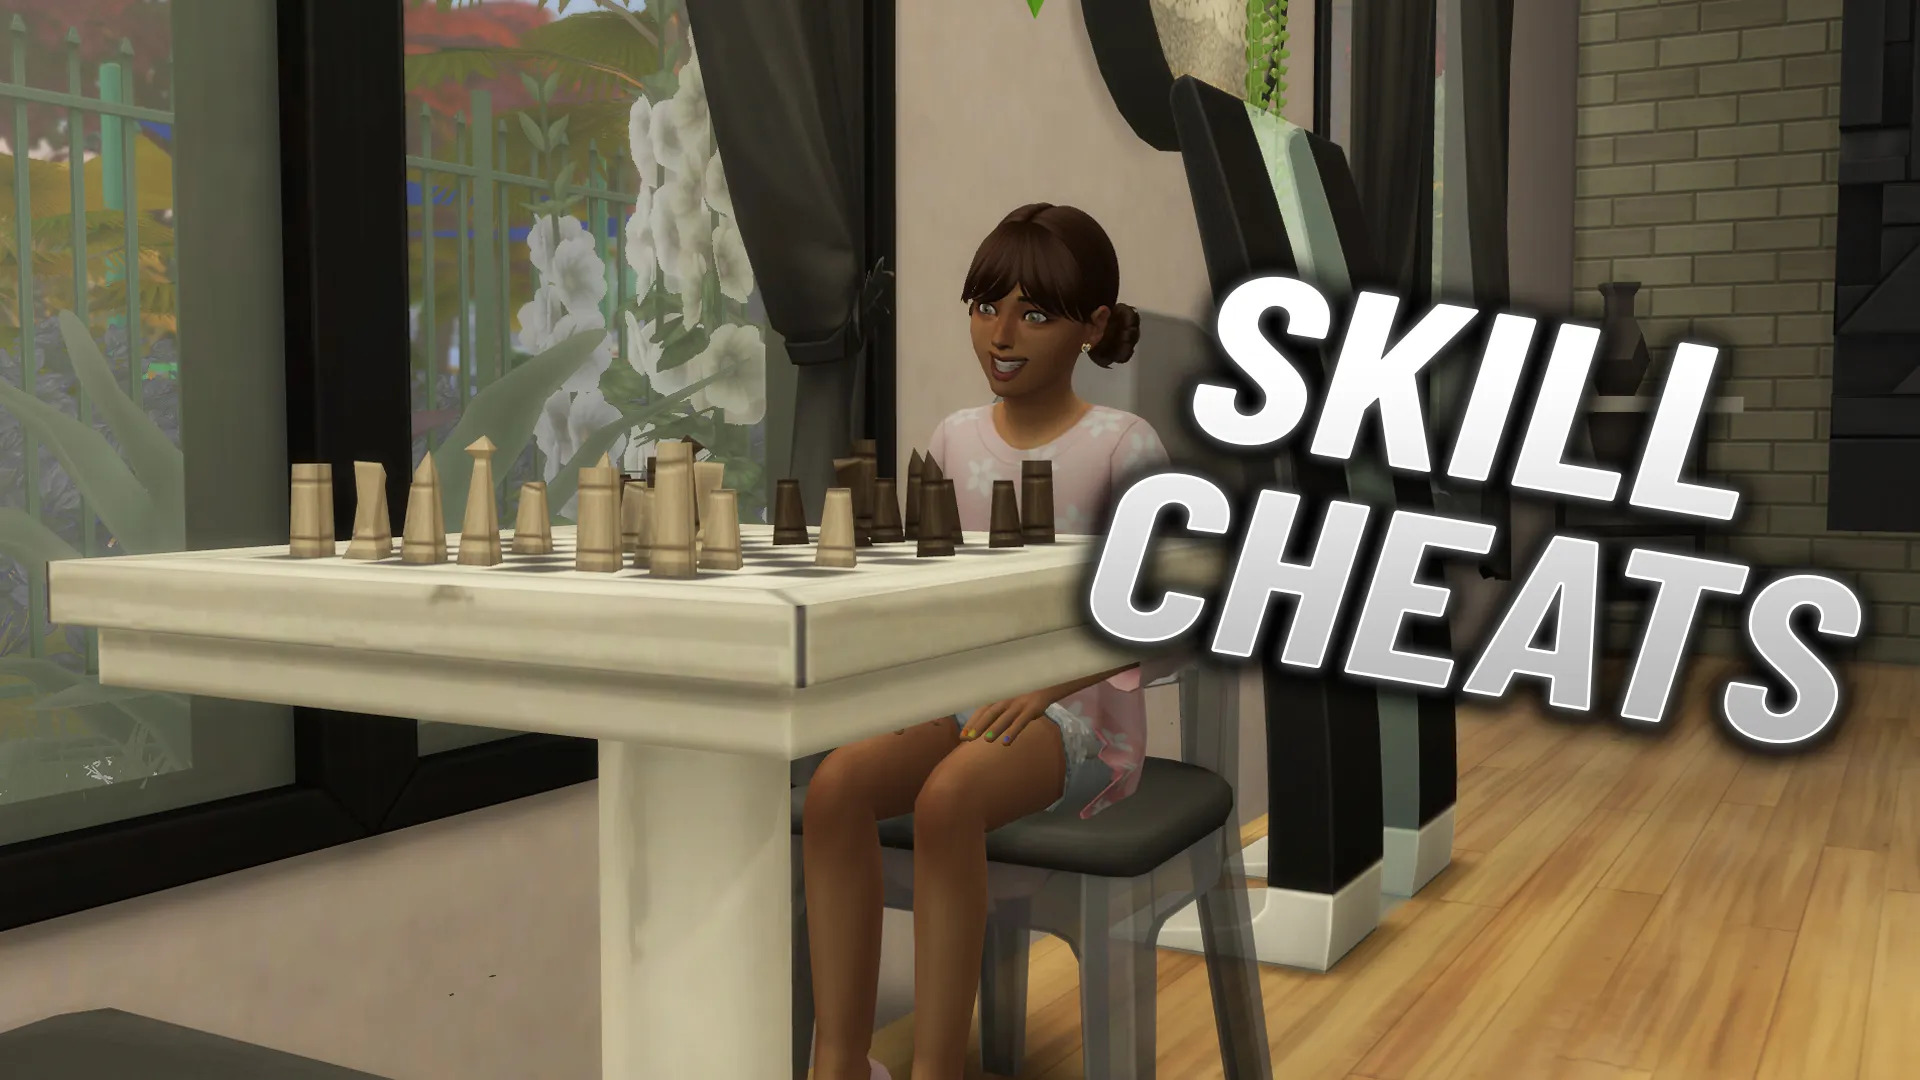 The Sims 4 skills list: every skill explained